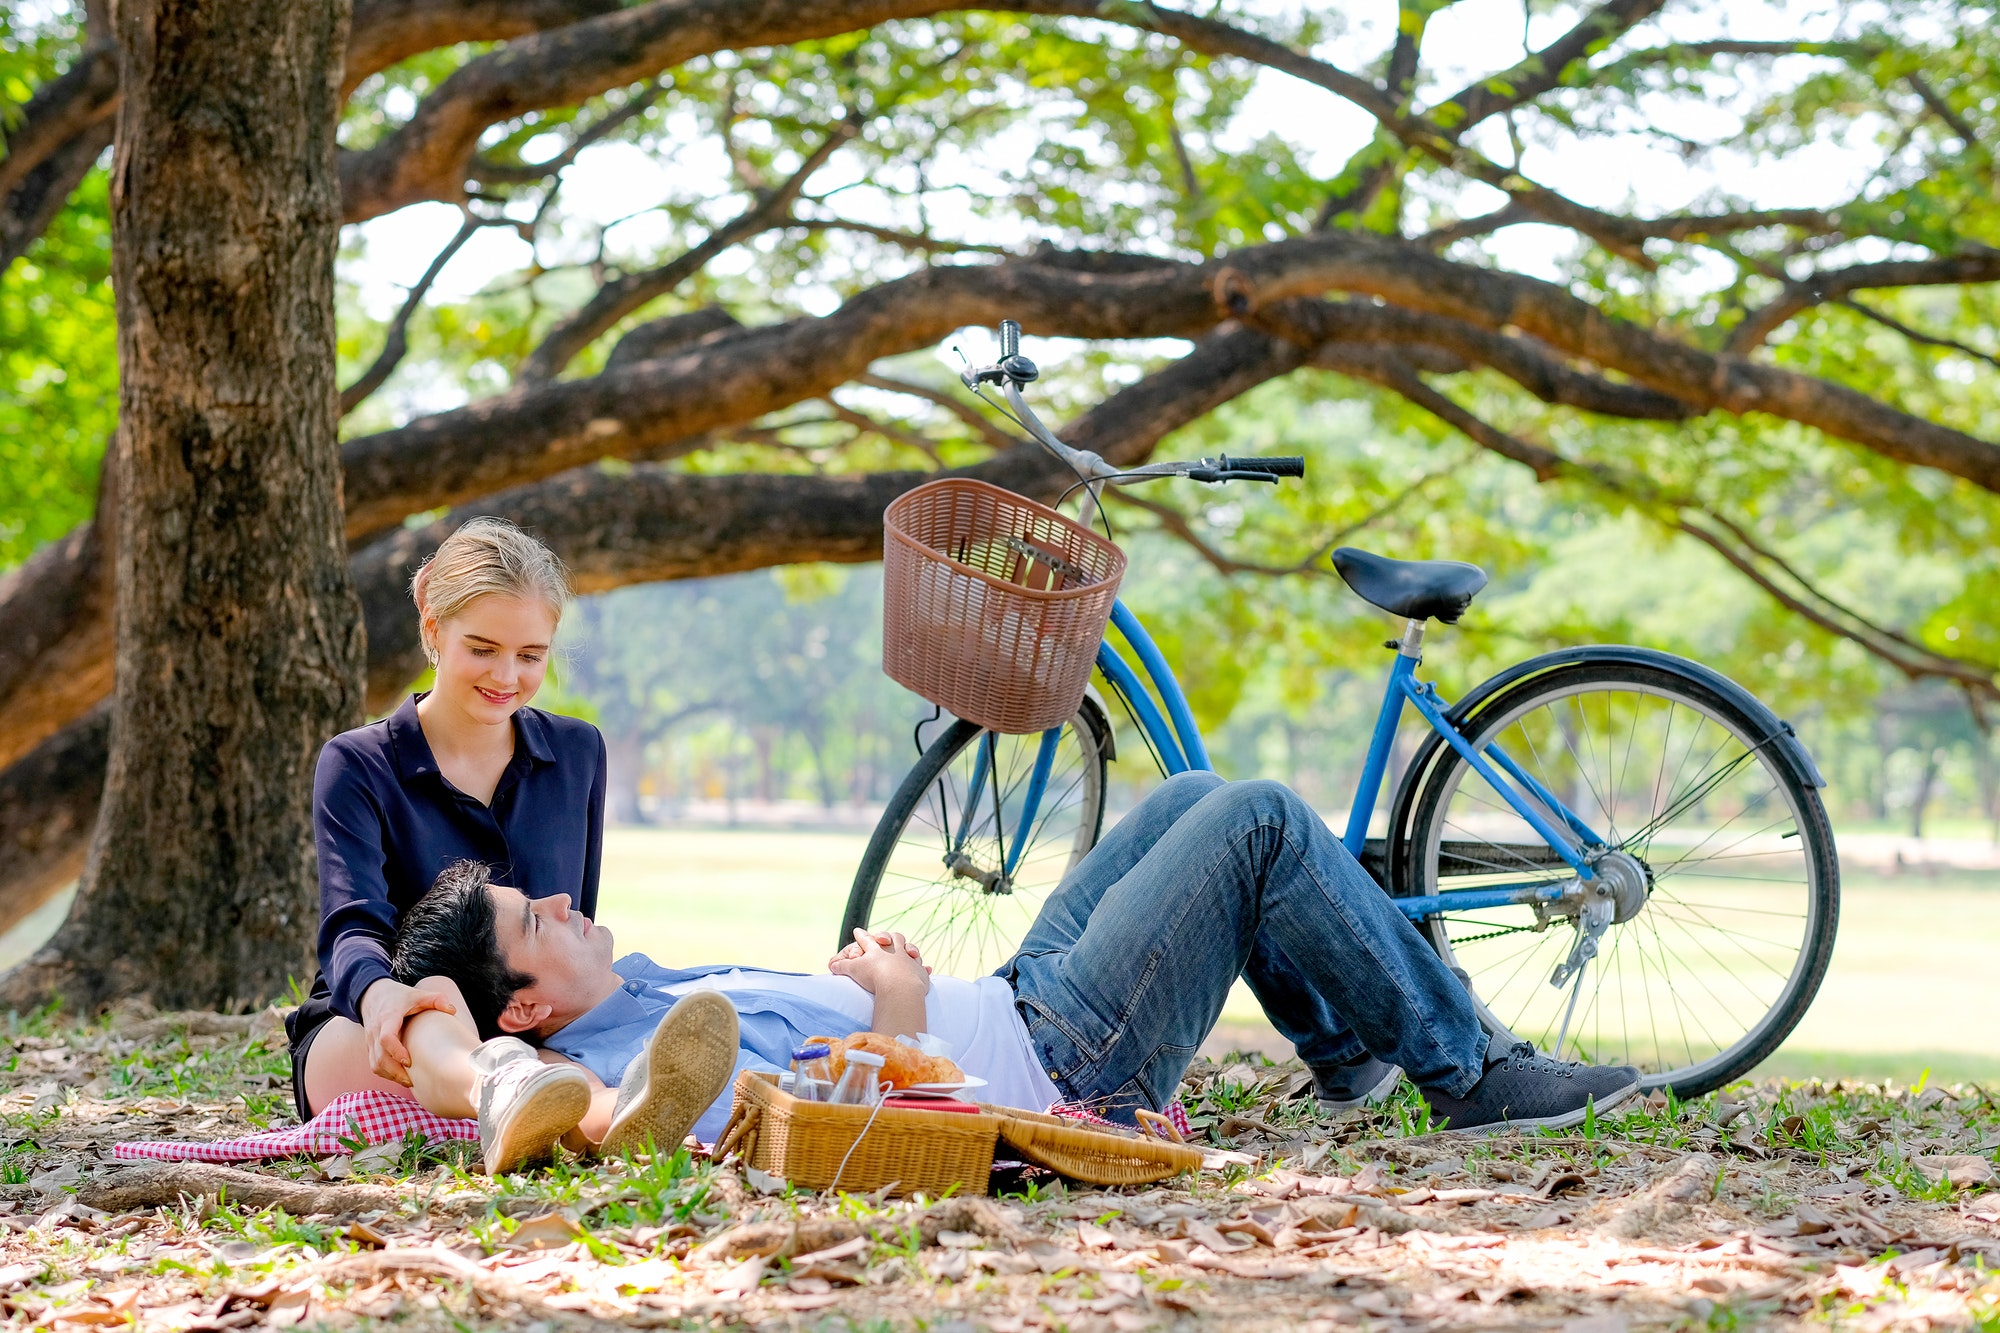 Couple lovers have picnic activity in the garden with blond hair girl with handsome man